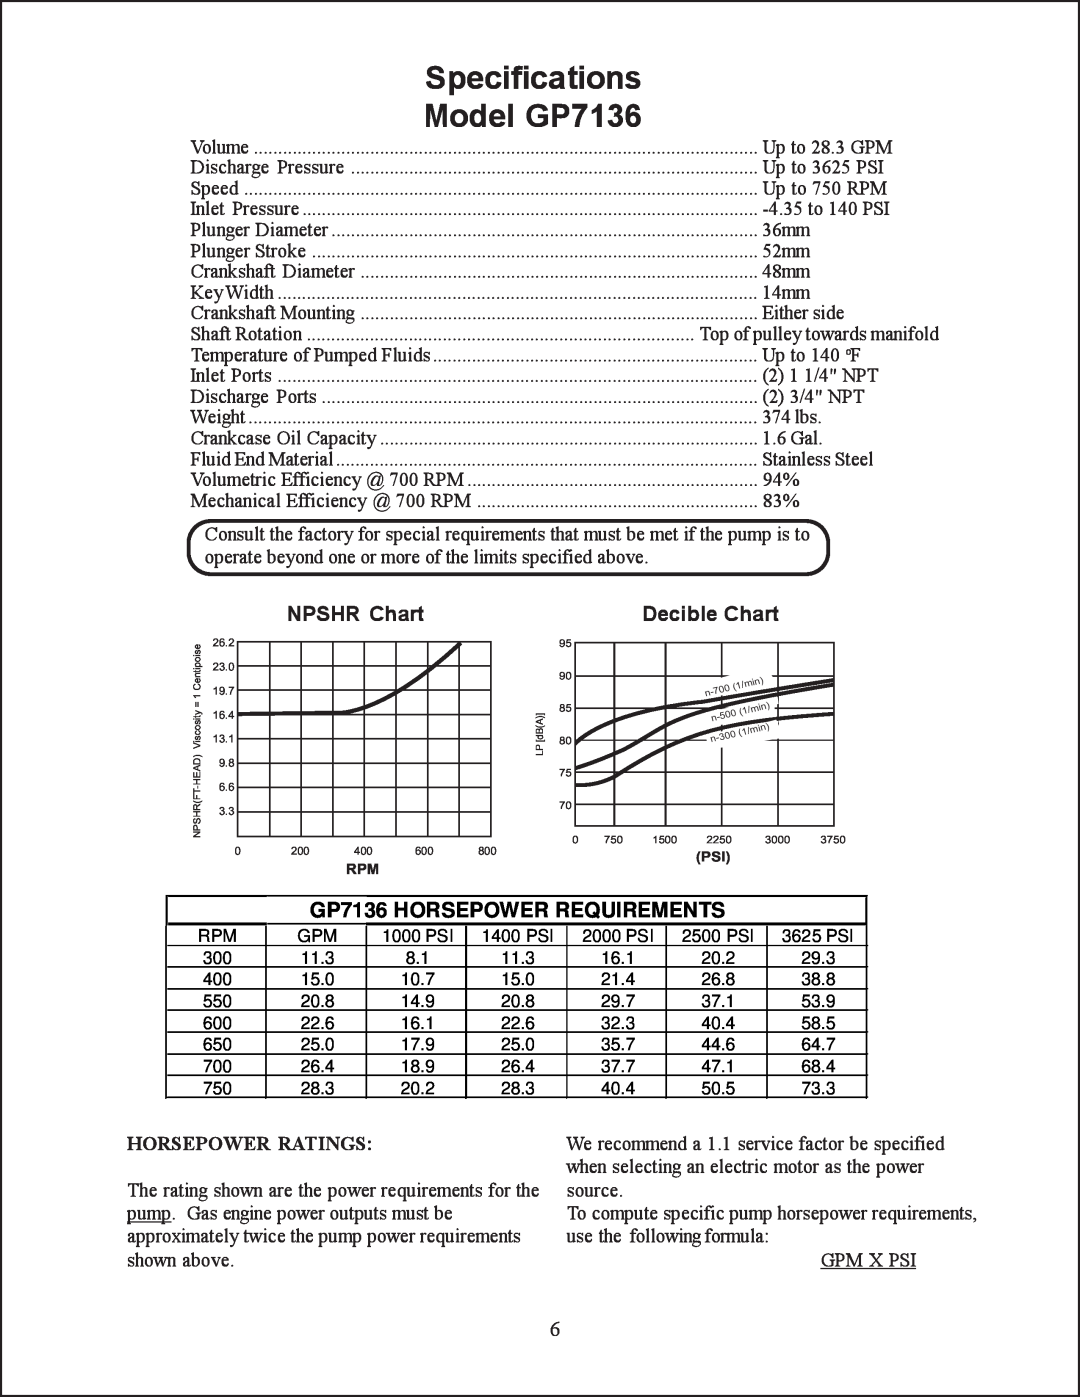 Giant GP7132 service manual Model GP7136, GP7136 HORSEPOWER REQUIREMENTS, Specifications, NPSHR Chart, Decible Chart 